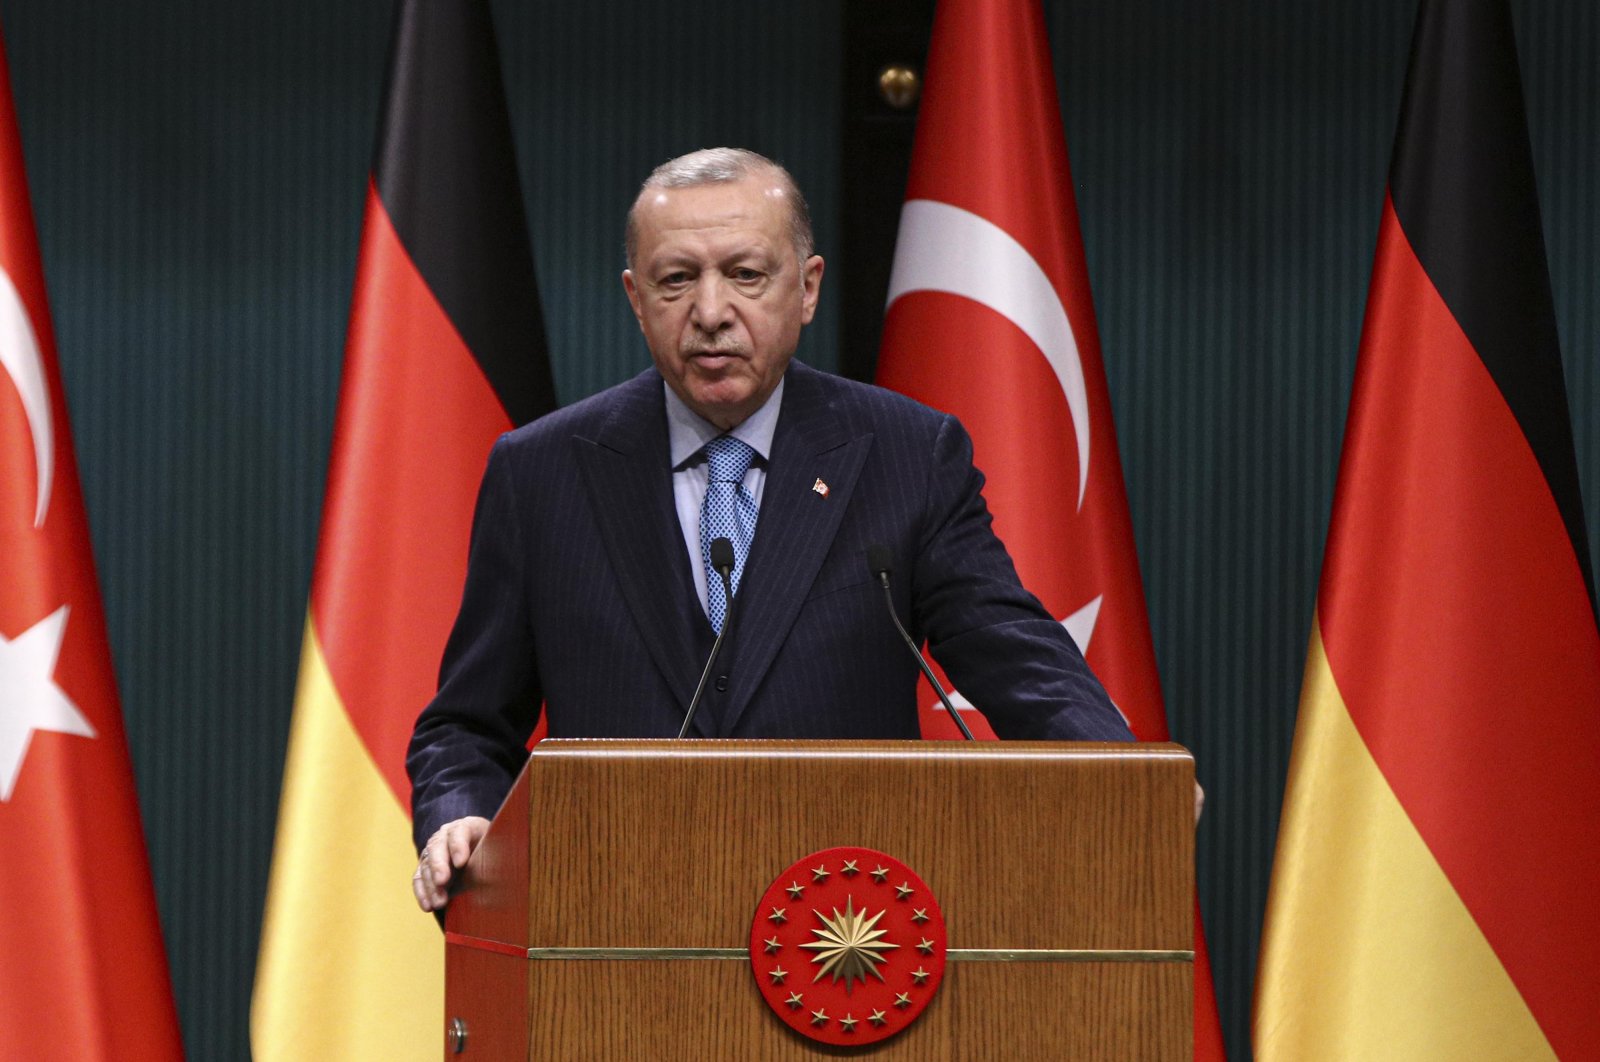 President Recep Tayyip Erdoğan speaking during a press conference with German Chancellor Olaf Scholz in Ankara, Turkey, March 14, 2022 (DHA Photo) 